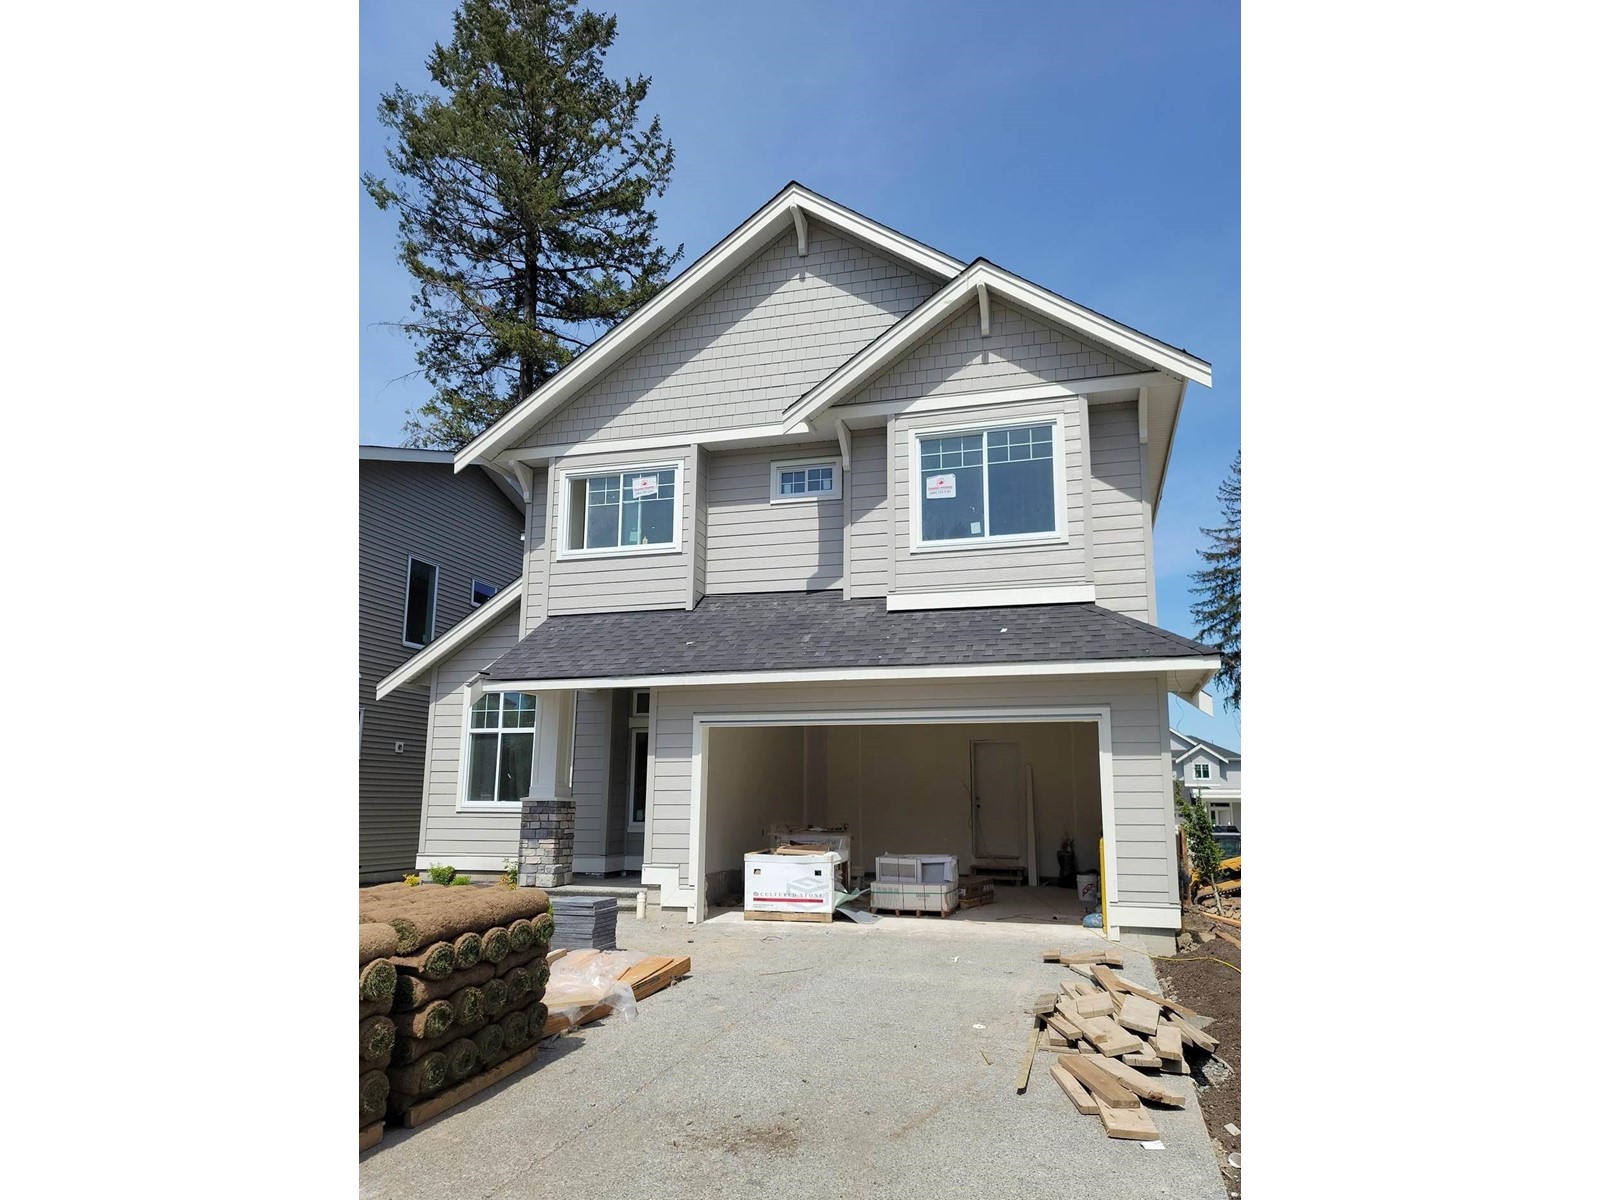 Property Listing: 20523 76a Avenue, Langley, British Columbia